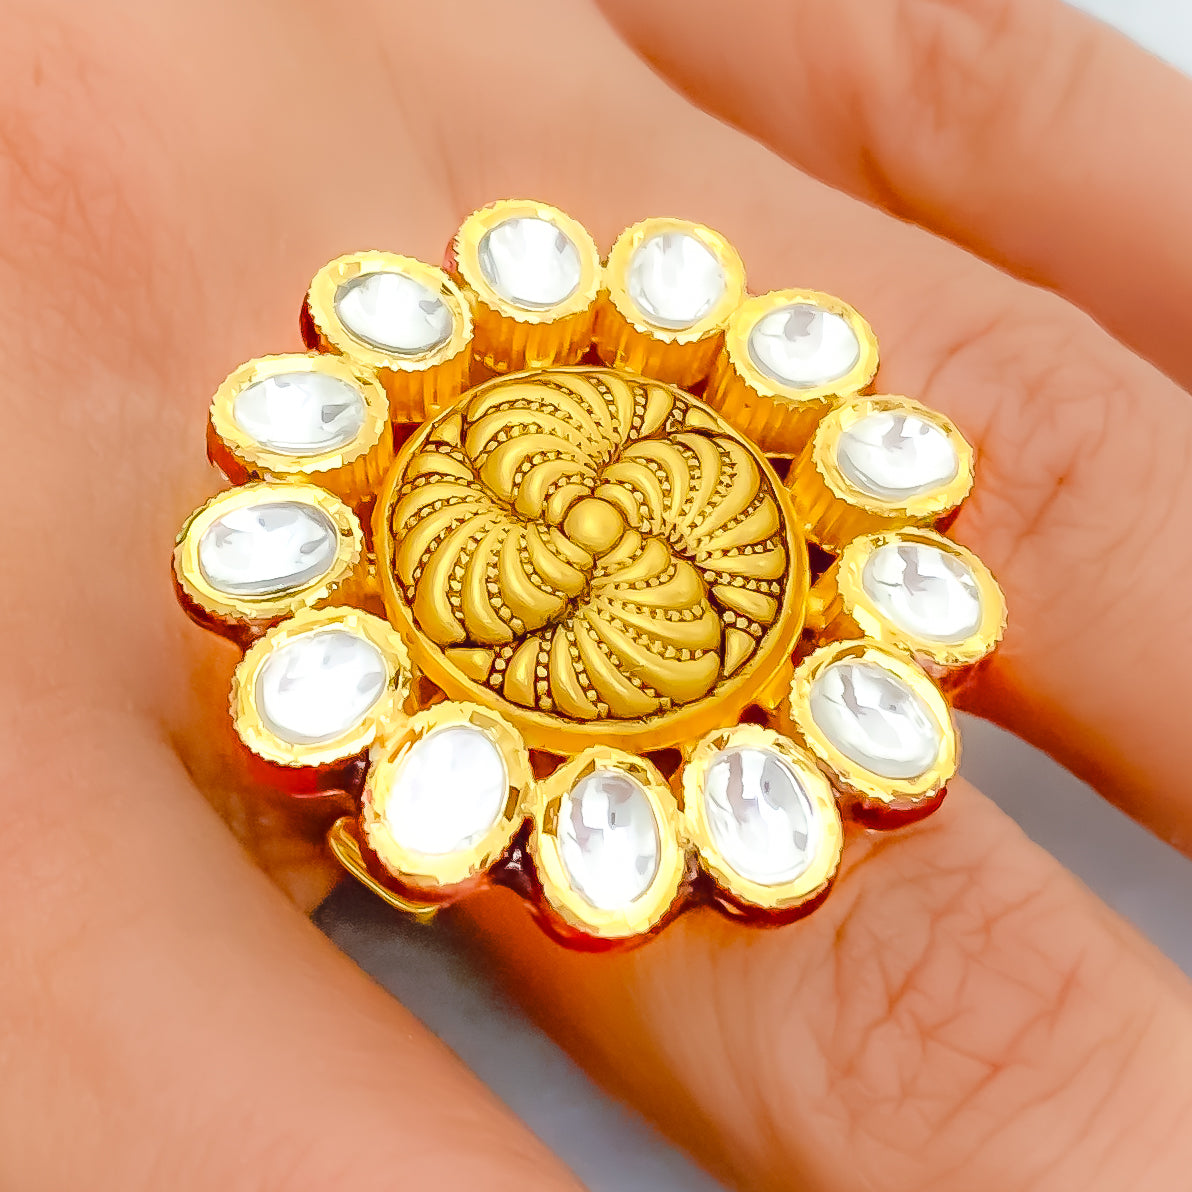 antique gold rings designs - Google Search | Bridal gold jewellery designs,  Bridal gold jewellery, New gold jewellery designs